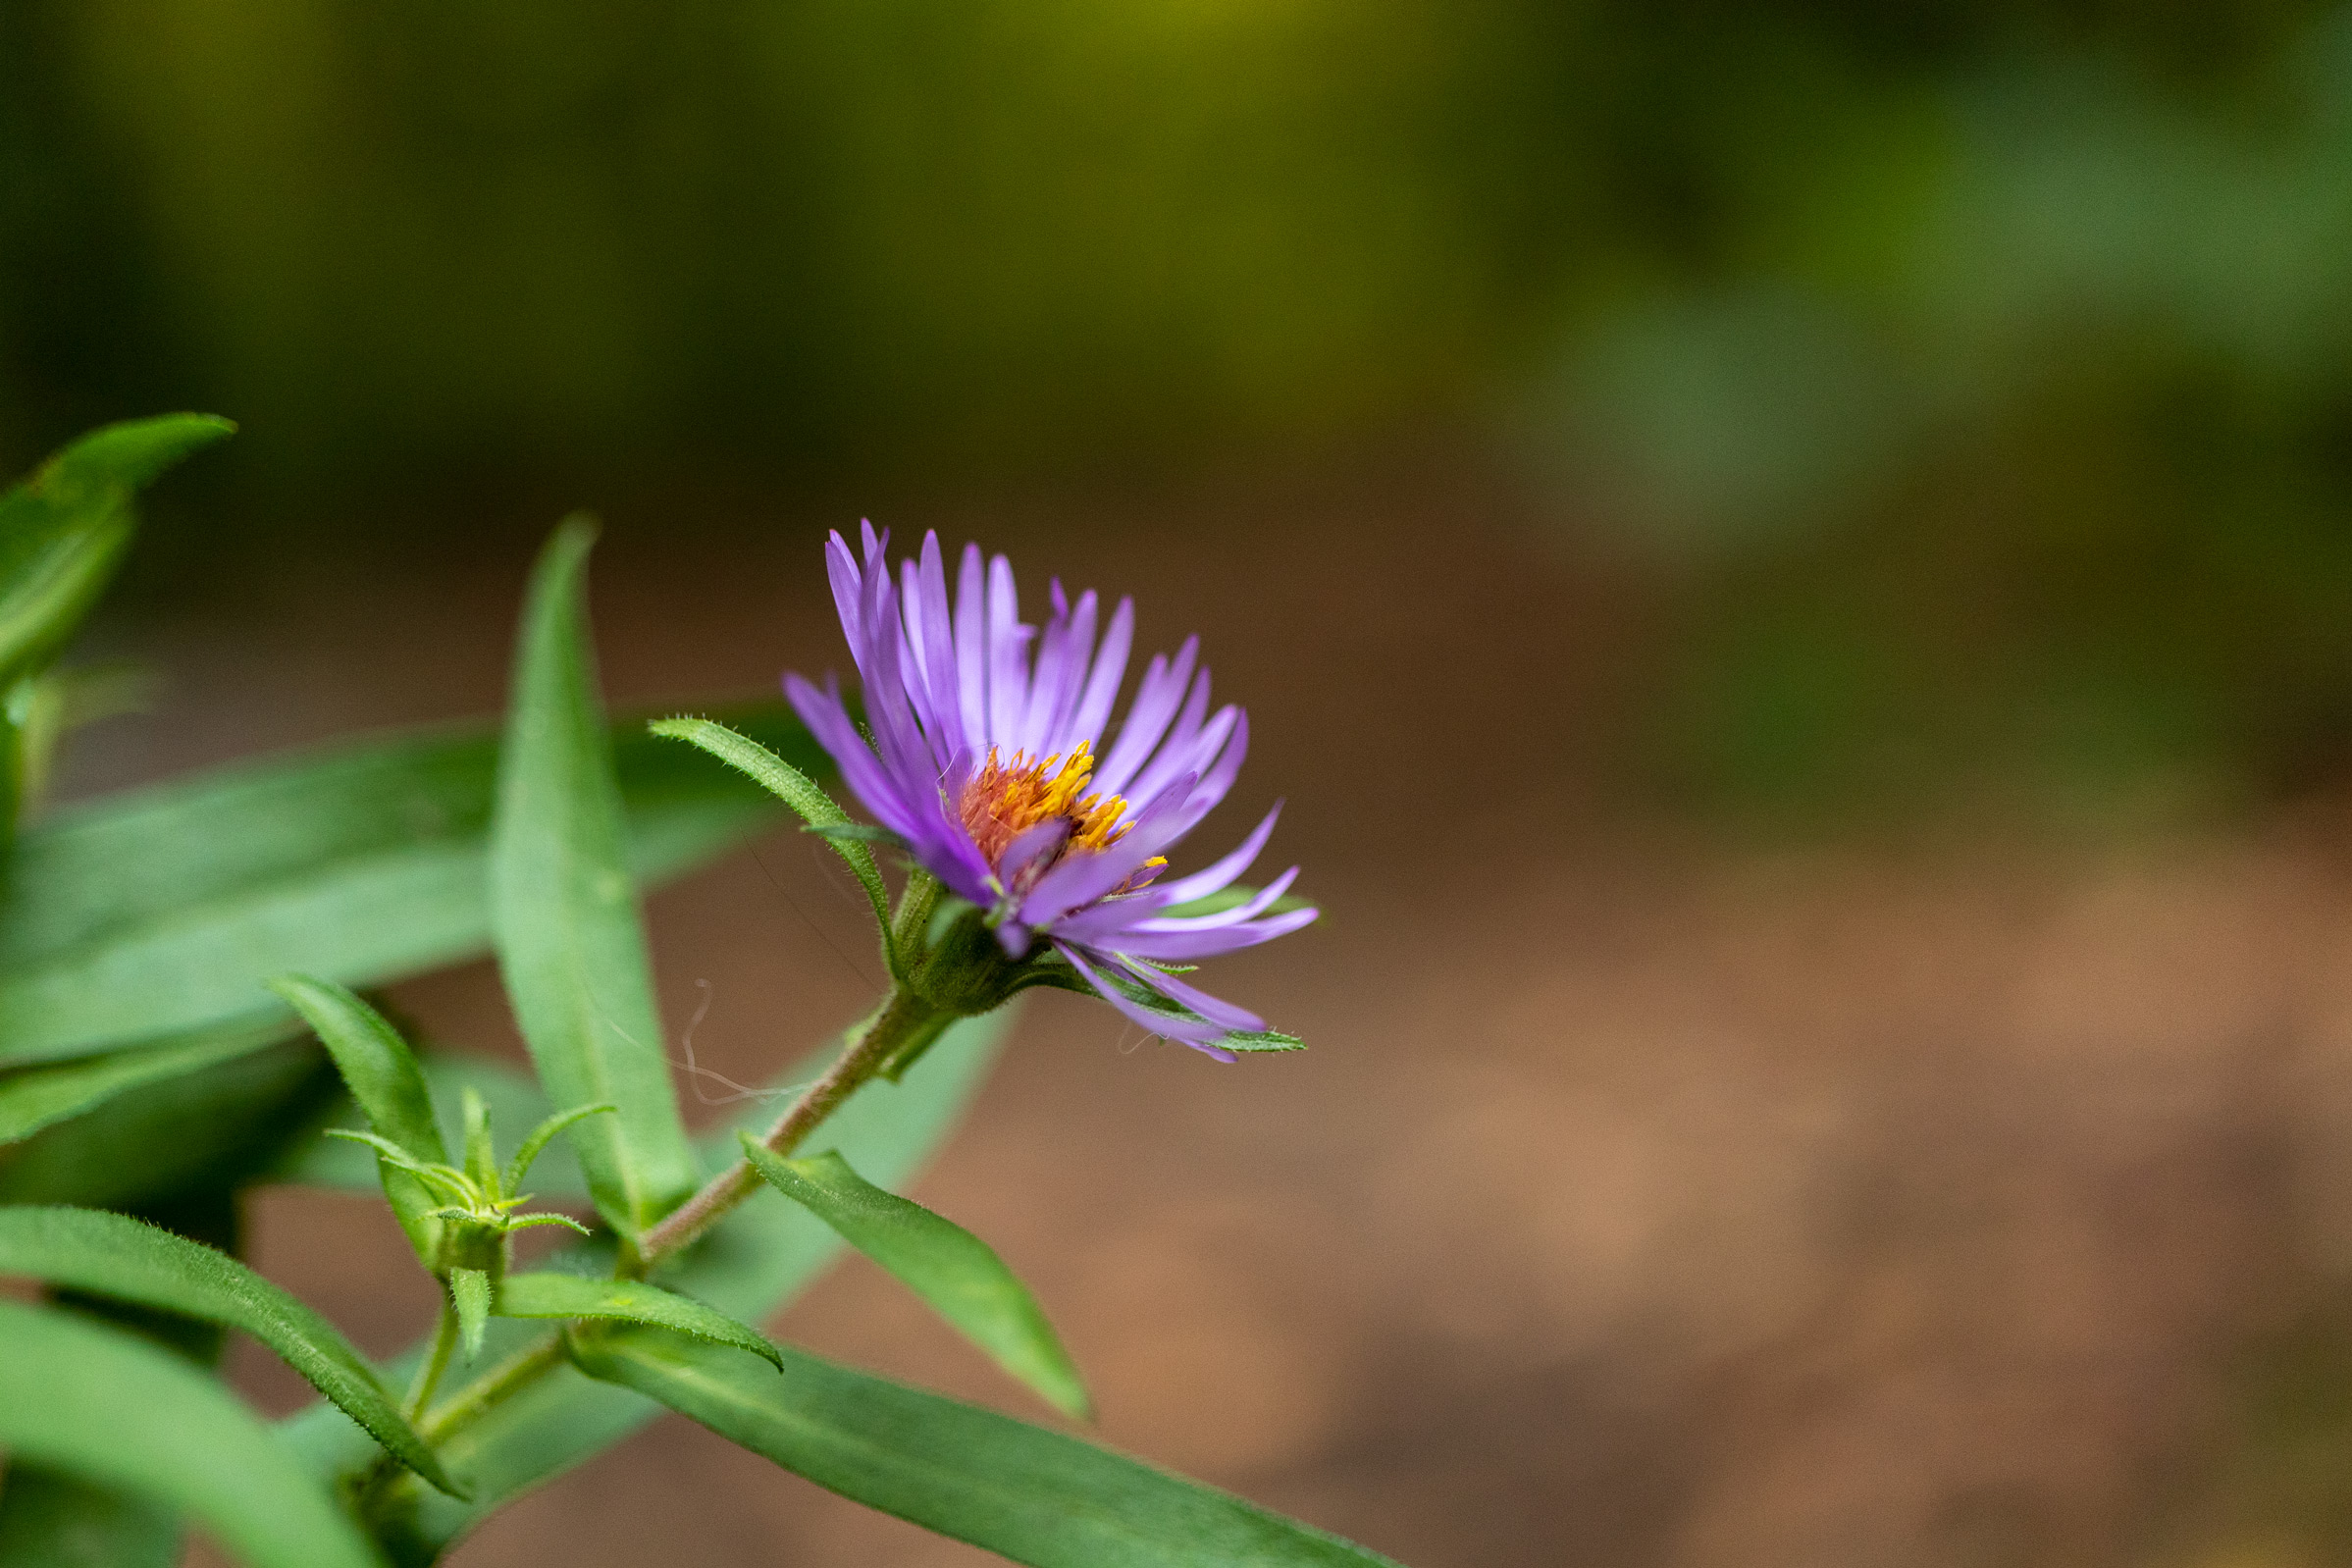 Purple flower with many thin petals and a yellow centre with several slim green leaves on its stalk